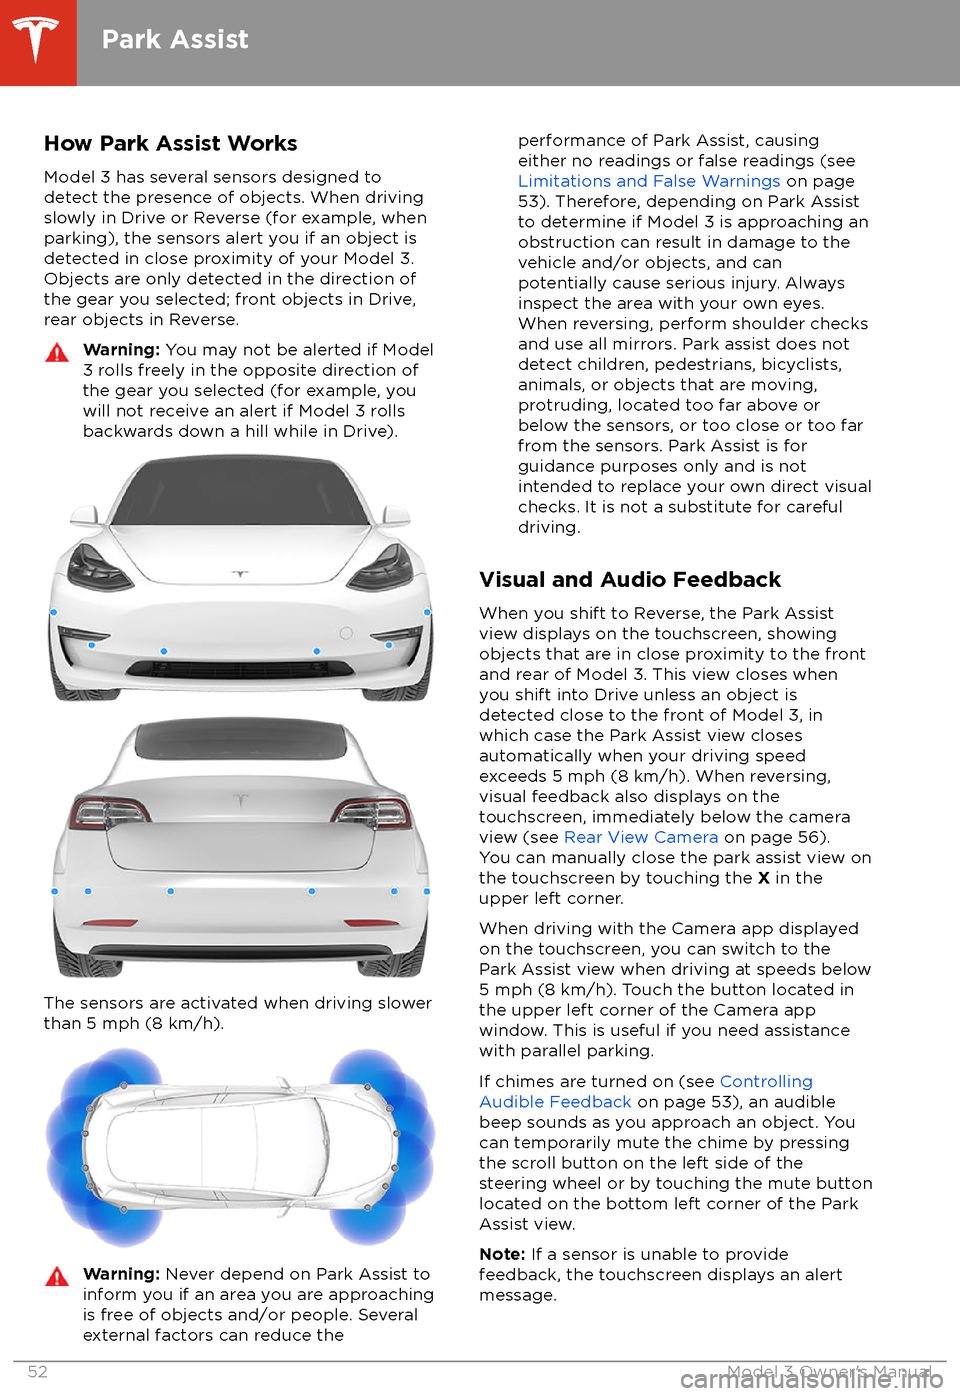 TESLA MODEL 3 2018 Workshop Manual How Park Assist WorksModel 3 has several sensors designed to
detect the presence of objects. When driving slowly in Drive or Reverse (for example, when
parking), the sensors alert you if an object is
